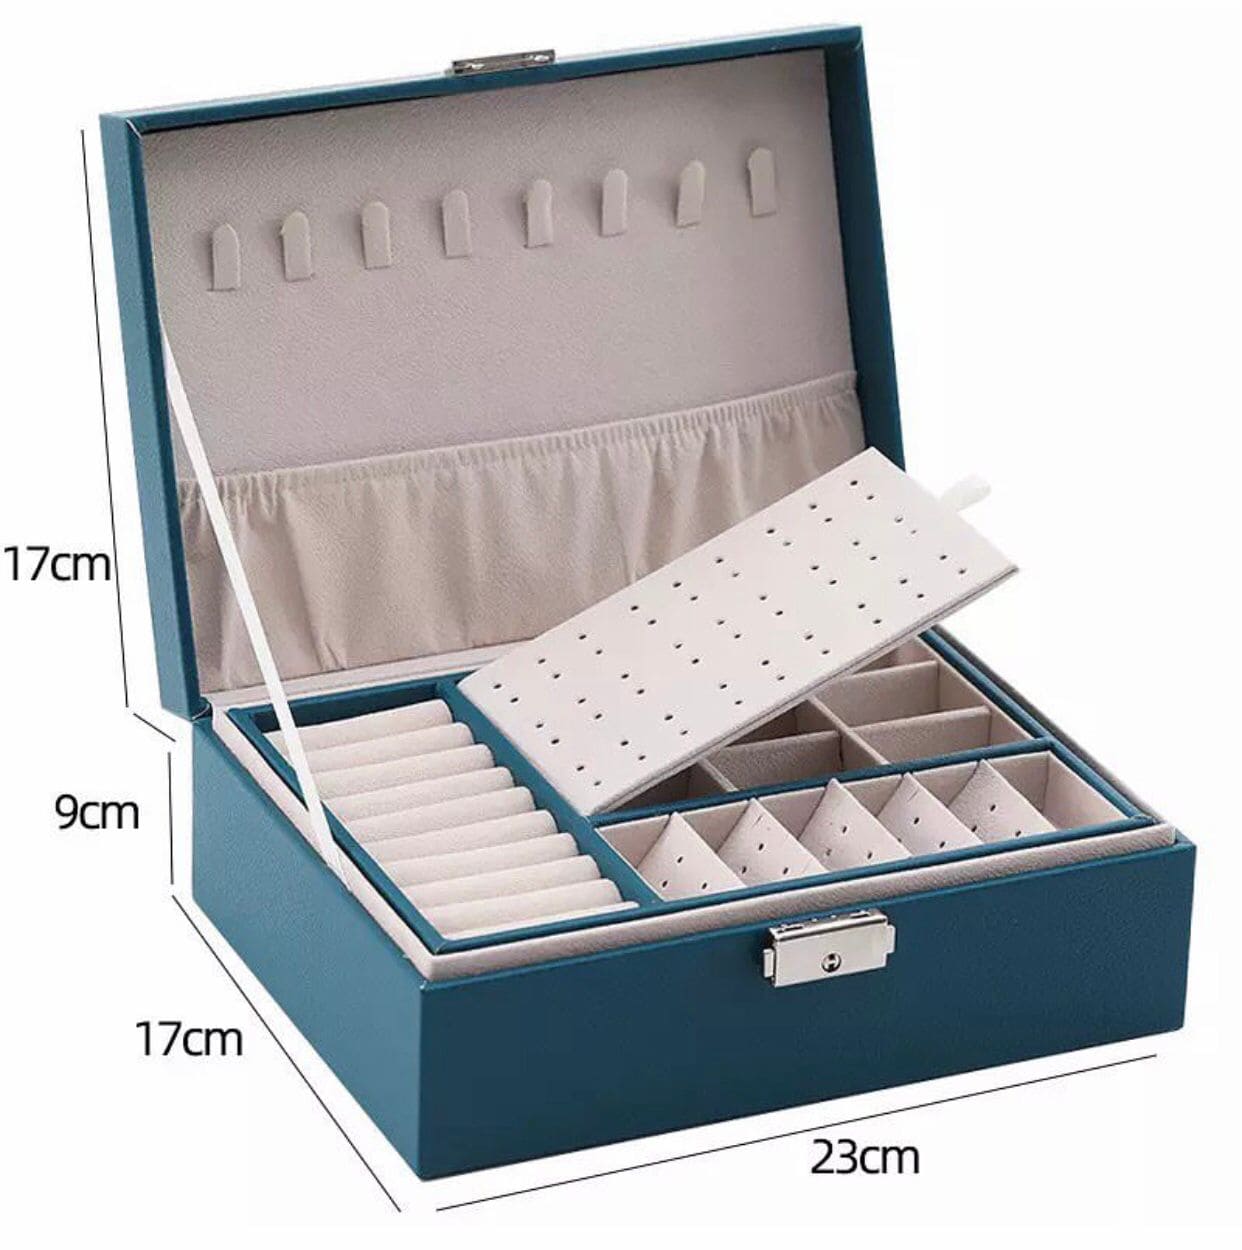 Double Layer Leather Jewellery Box, Earrings And Rings Storage Organizer, Portable Jewellery Box For Necklaces, Travel Jewelry Box Organizer with Lock, Travel Jewelry Leather Display Storage Case